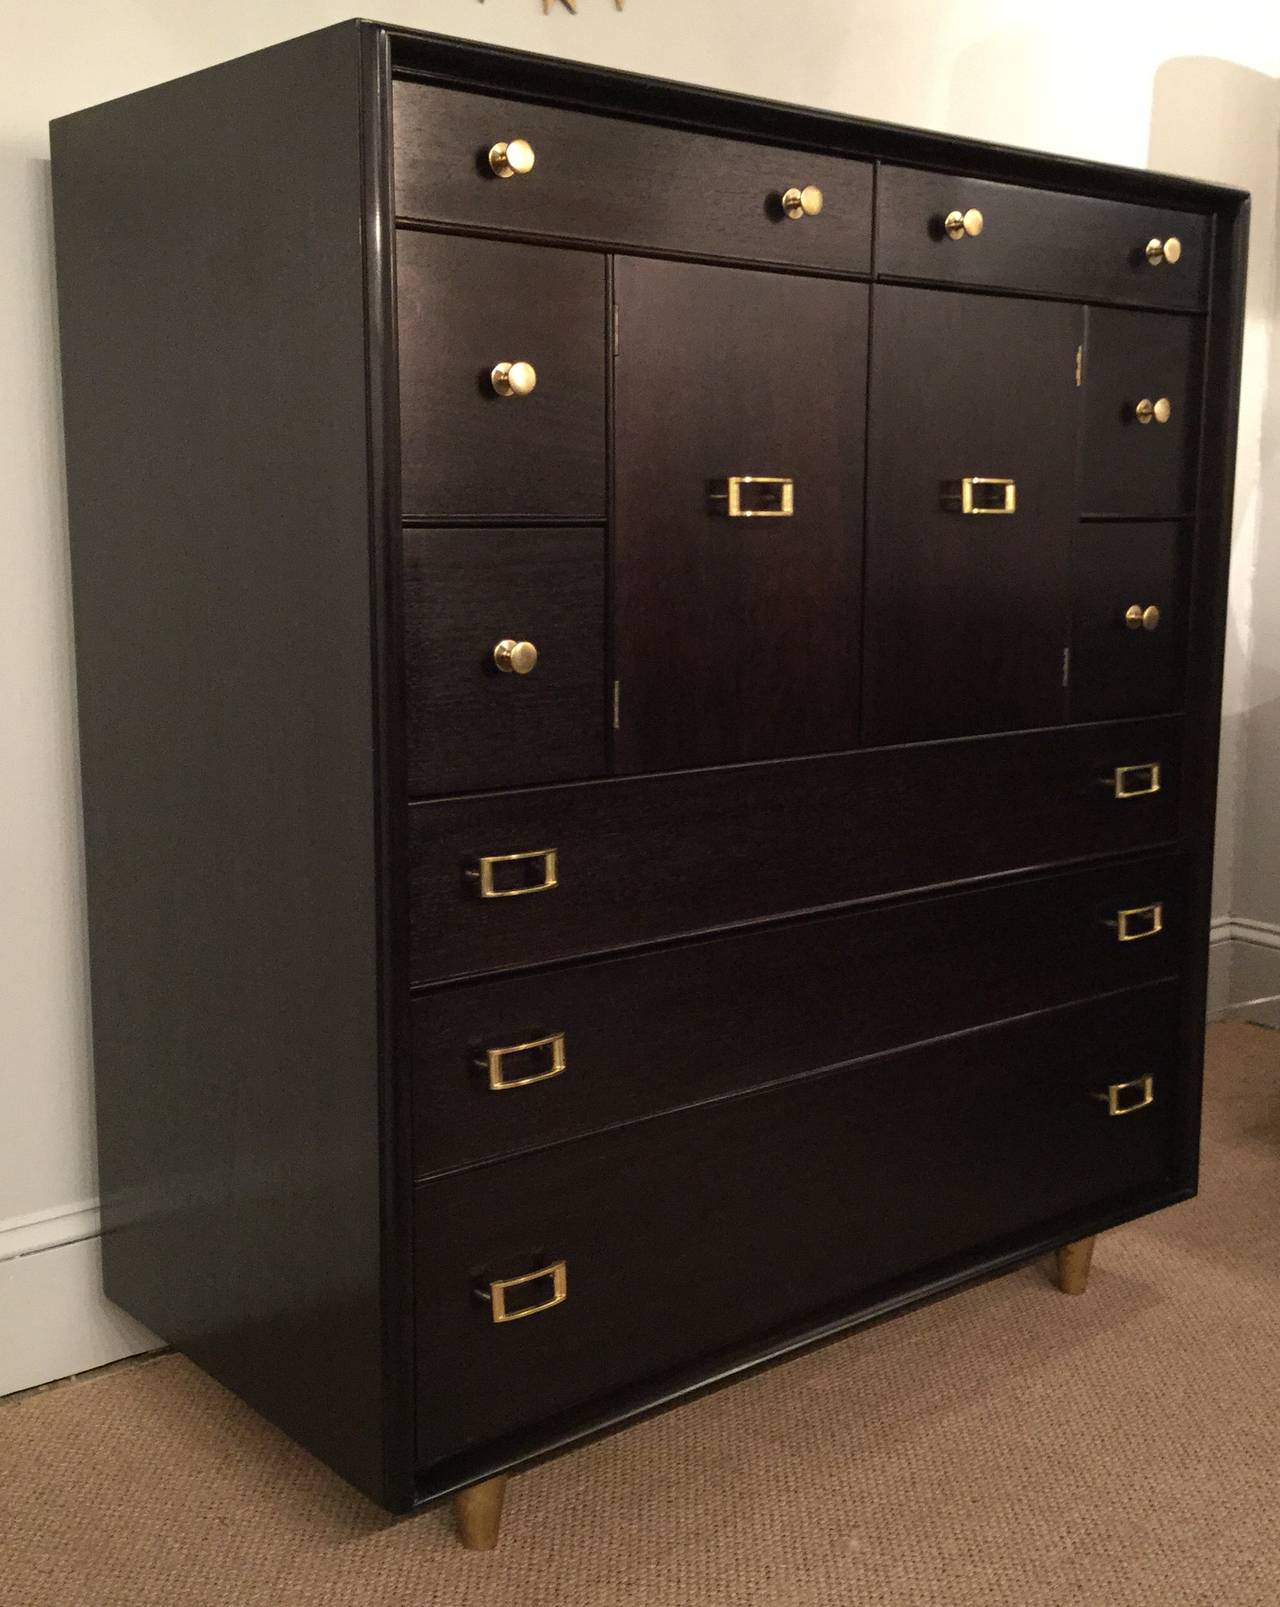 Newly ebonized walnut, tall chest of drawers with solid brass hardware by Paul Frankl.
A wonderful combination of nine deep and wide drawers, plus three concealed behind doors. Hardware, of solid brass is artfully manufactured and newly polished.